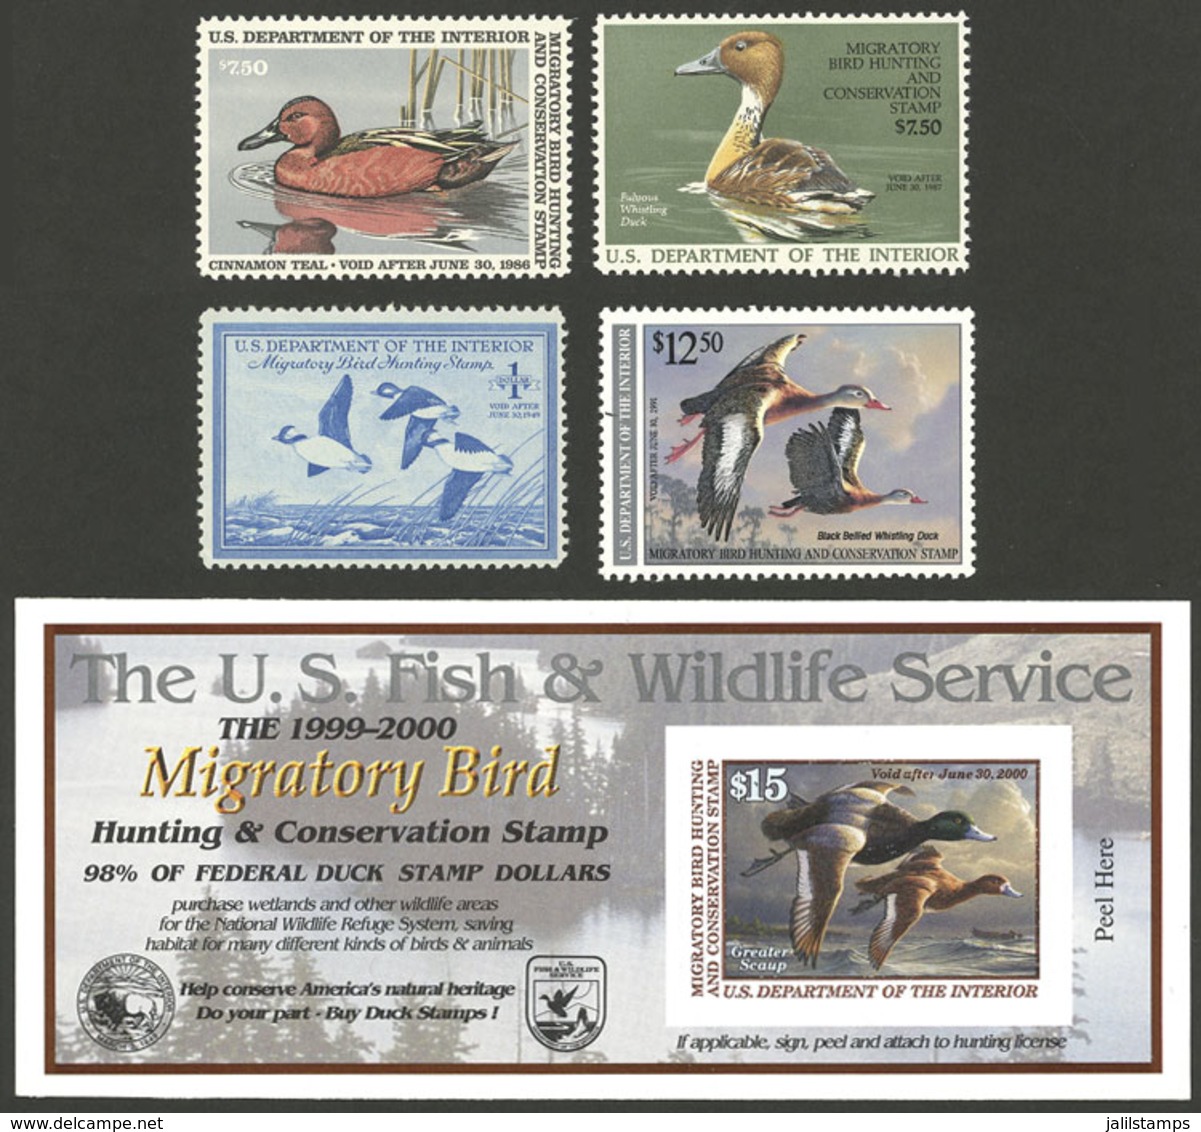 UNITED STATES: HUNTING PERMIT STAMPS: 4 Revenue Stamps + 1 Sheet, All MNH And Of Excellent Quality! - Revenues